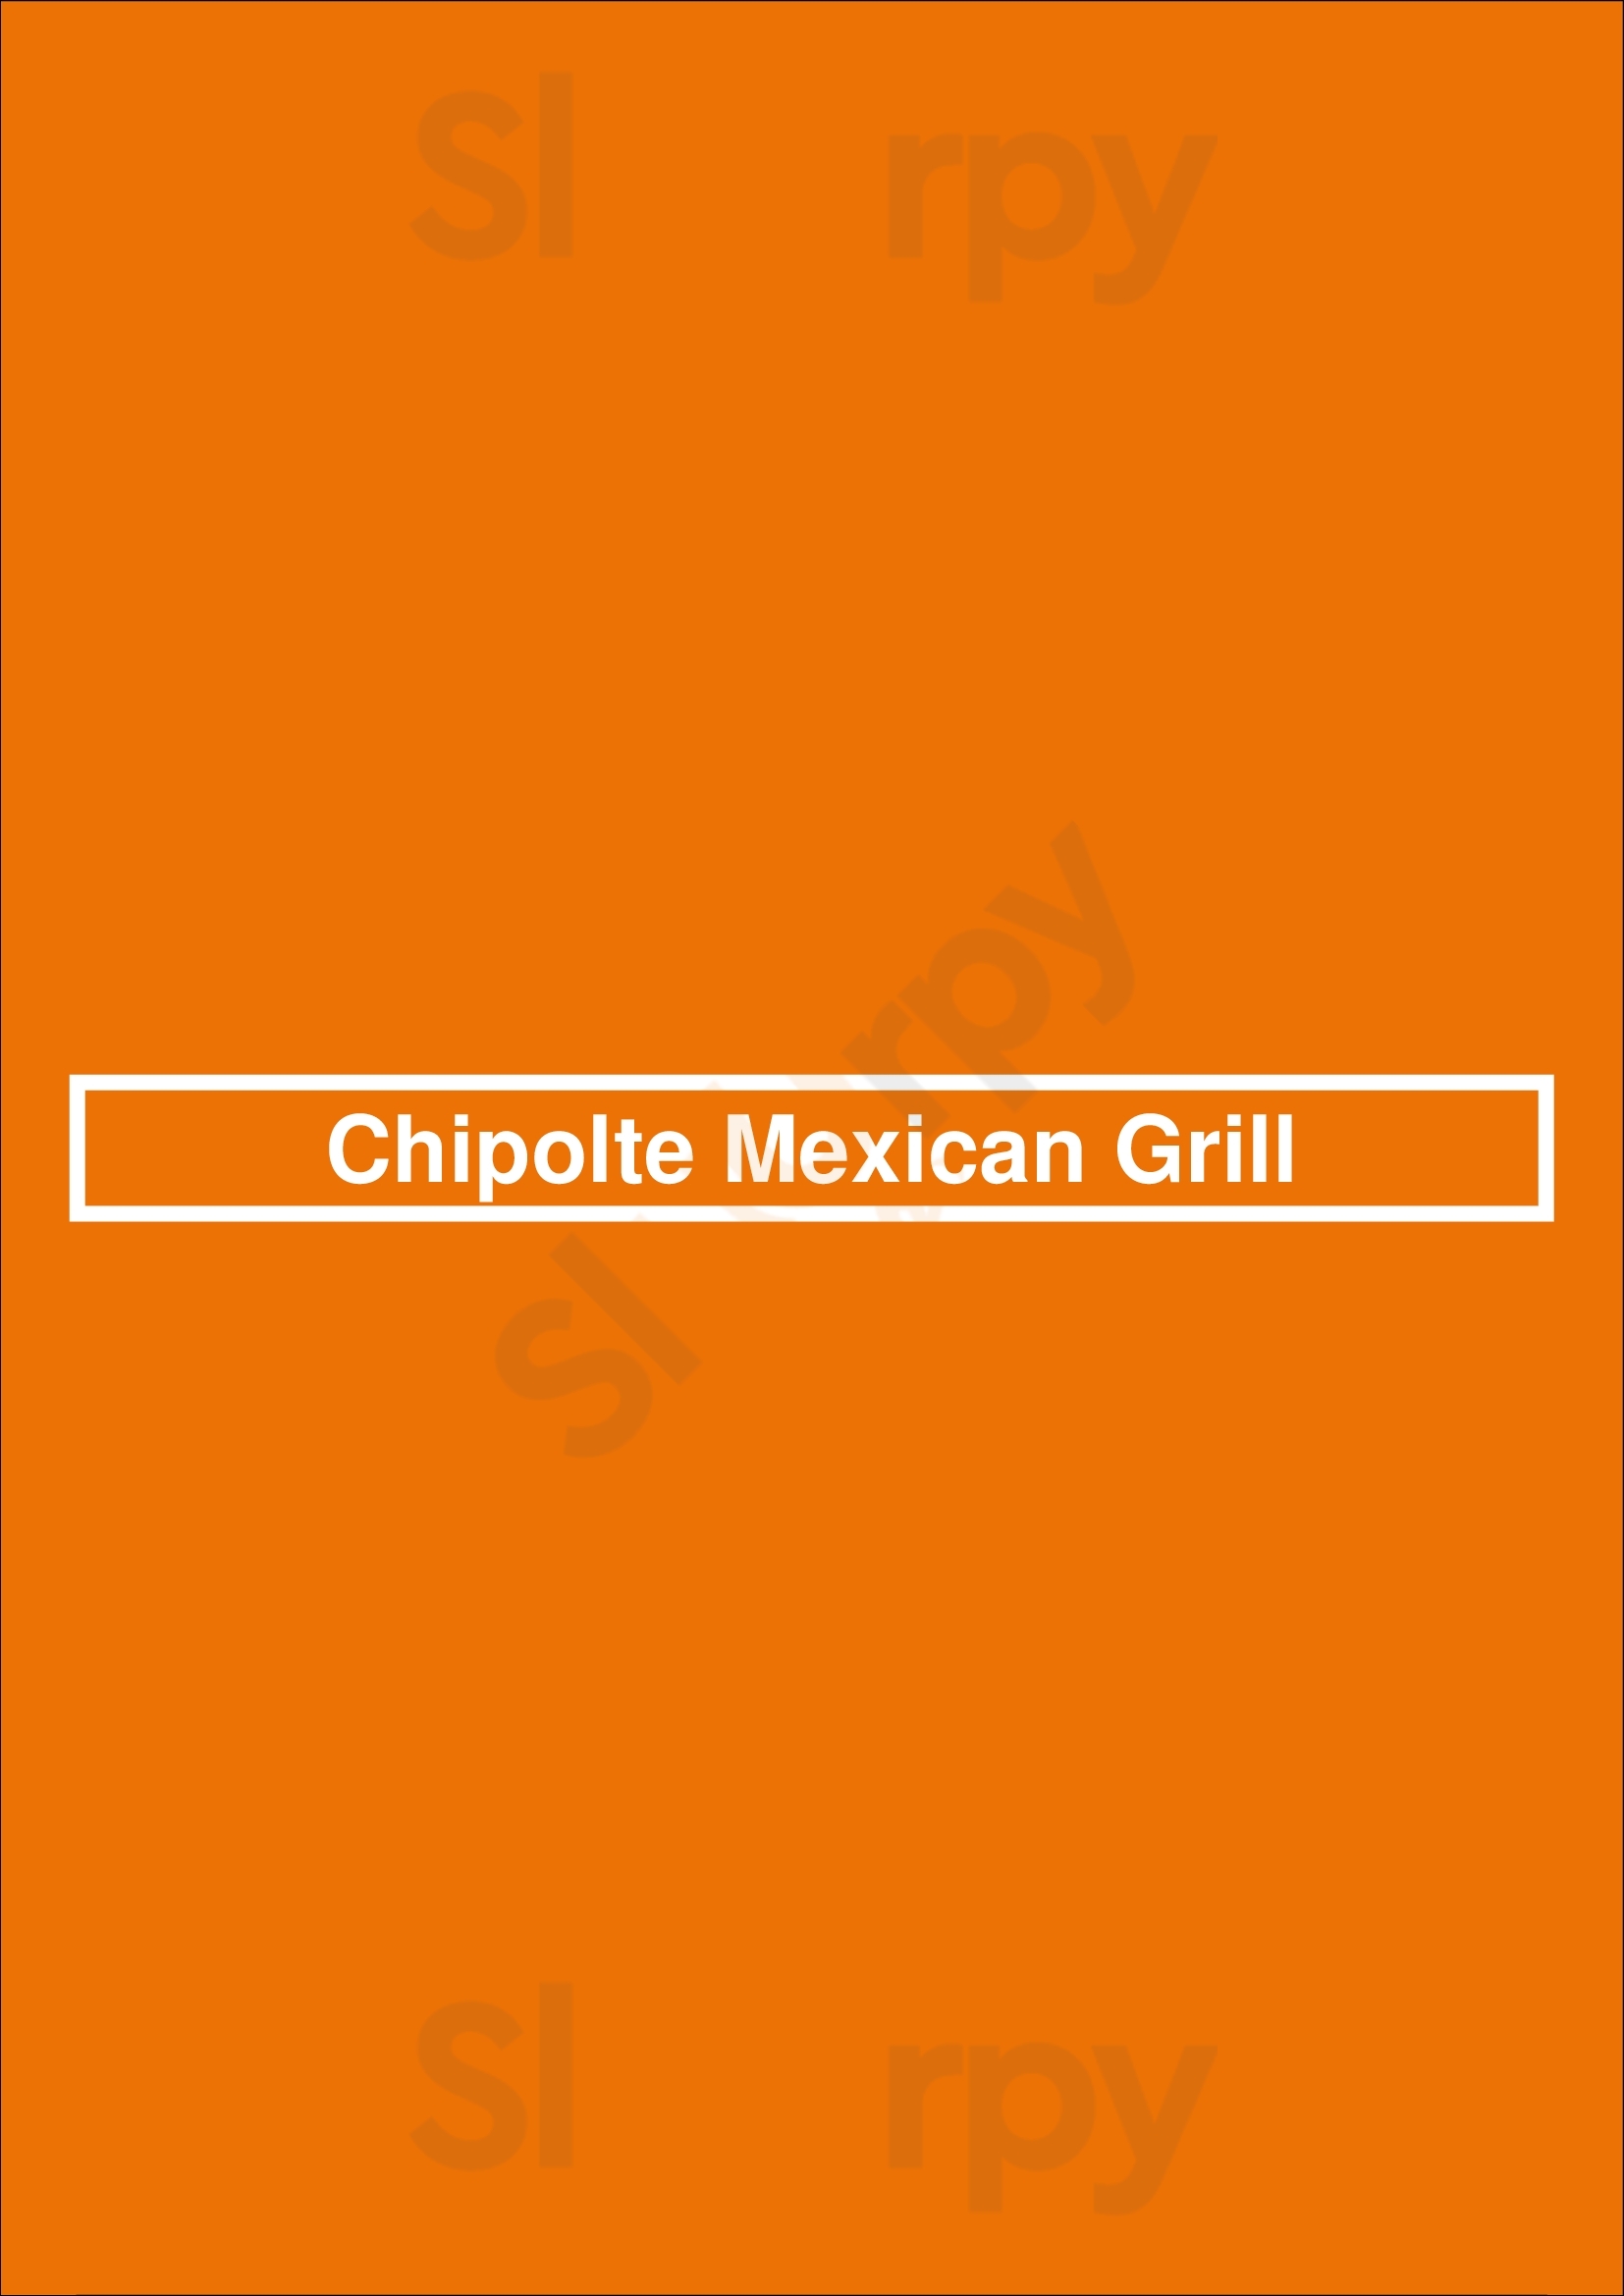 Chipolte Mexican Grill Pittsburgh Menu - 1